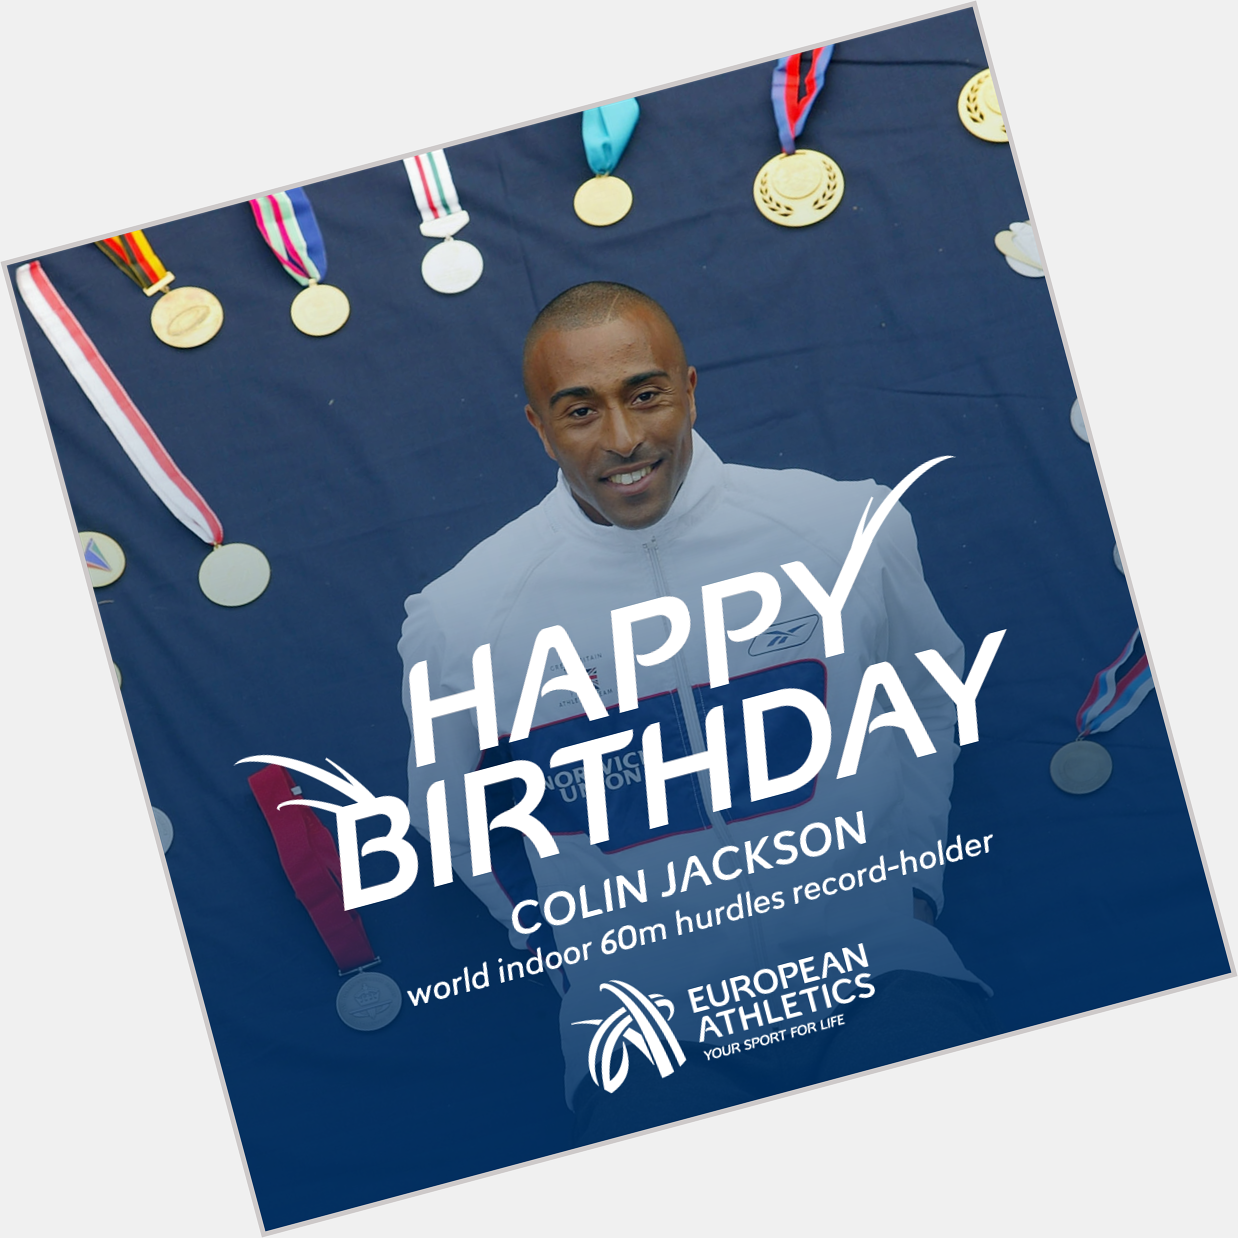 Happy birthday to world indoor 60m hurdles record-holder and four-time European 110m hurdles champion Colin Jackson! 